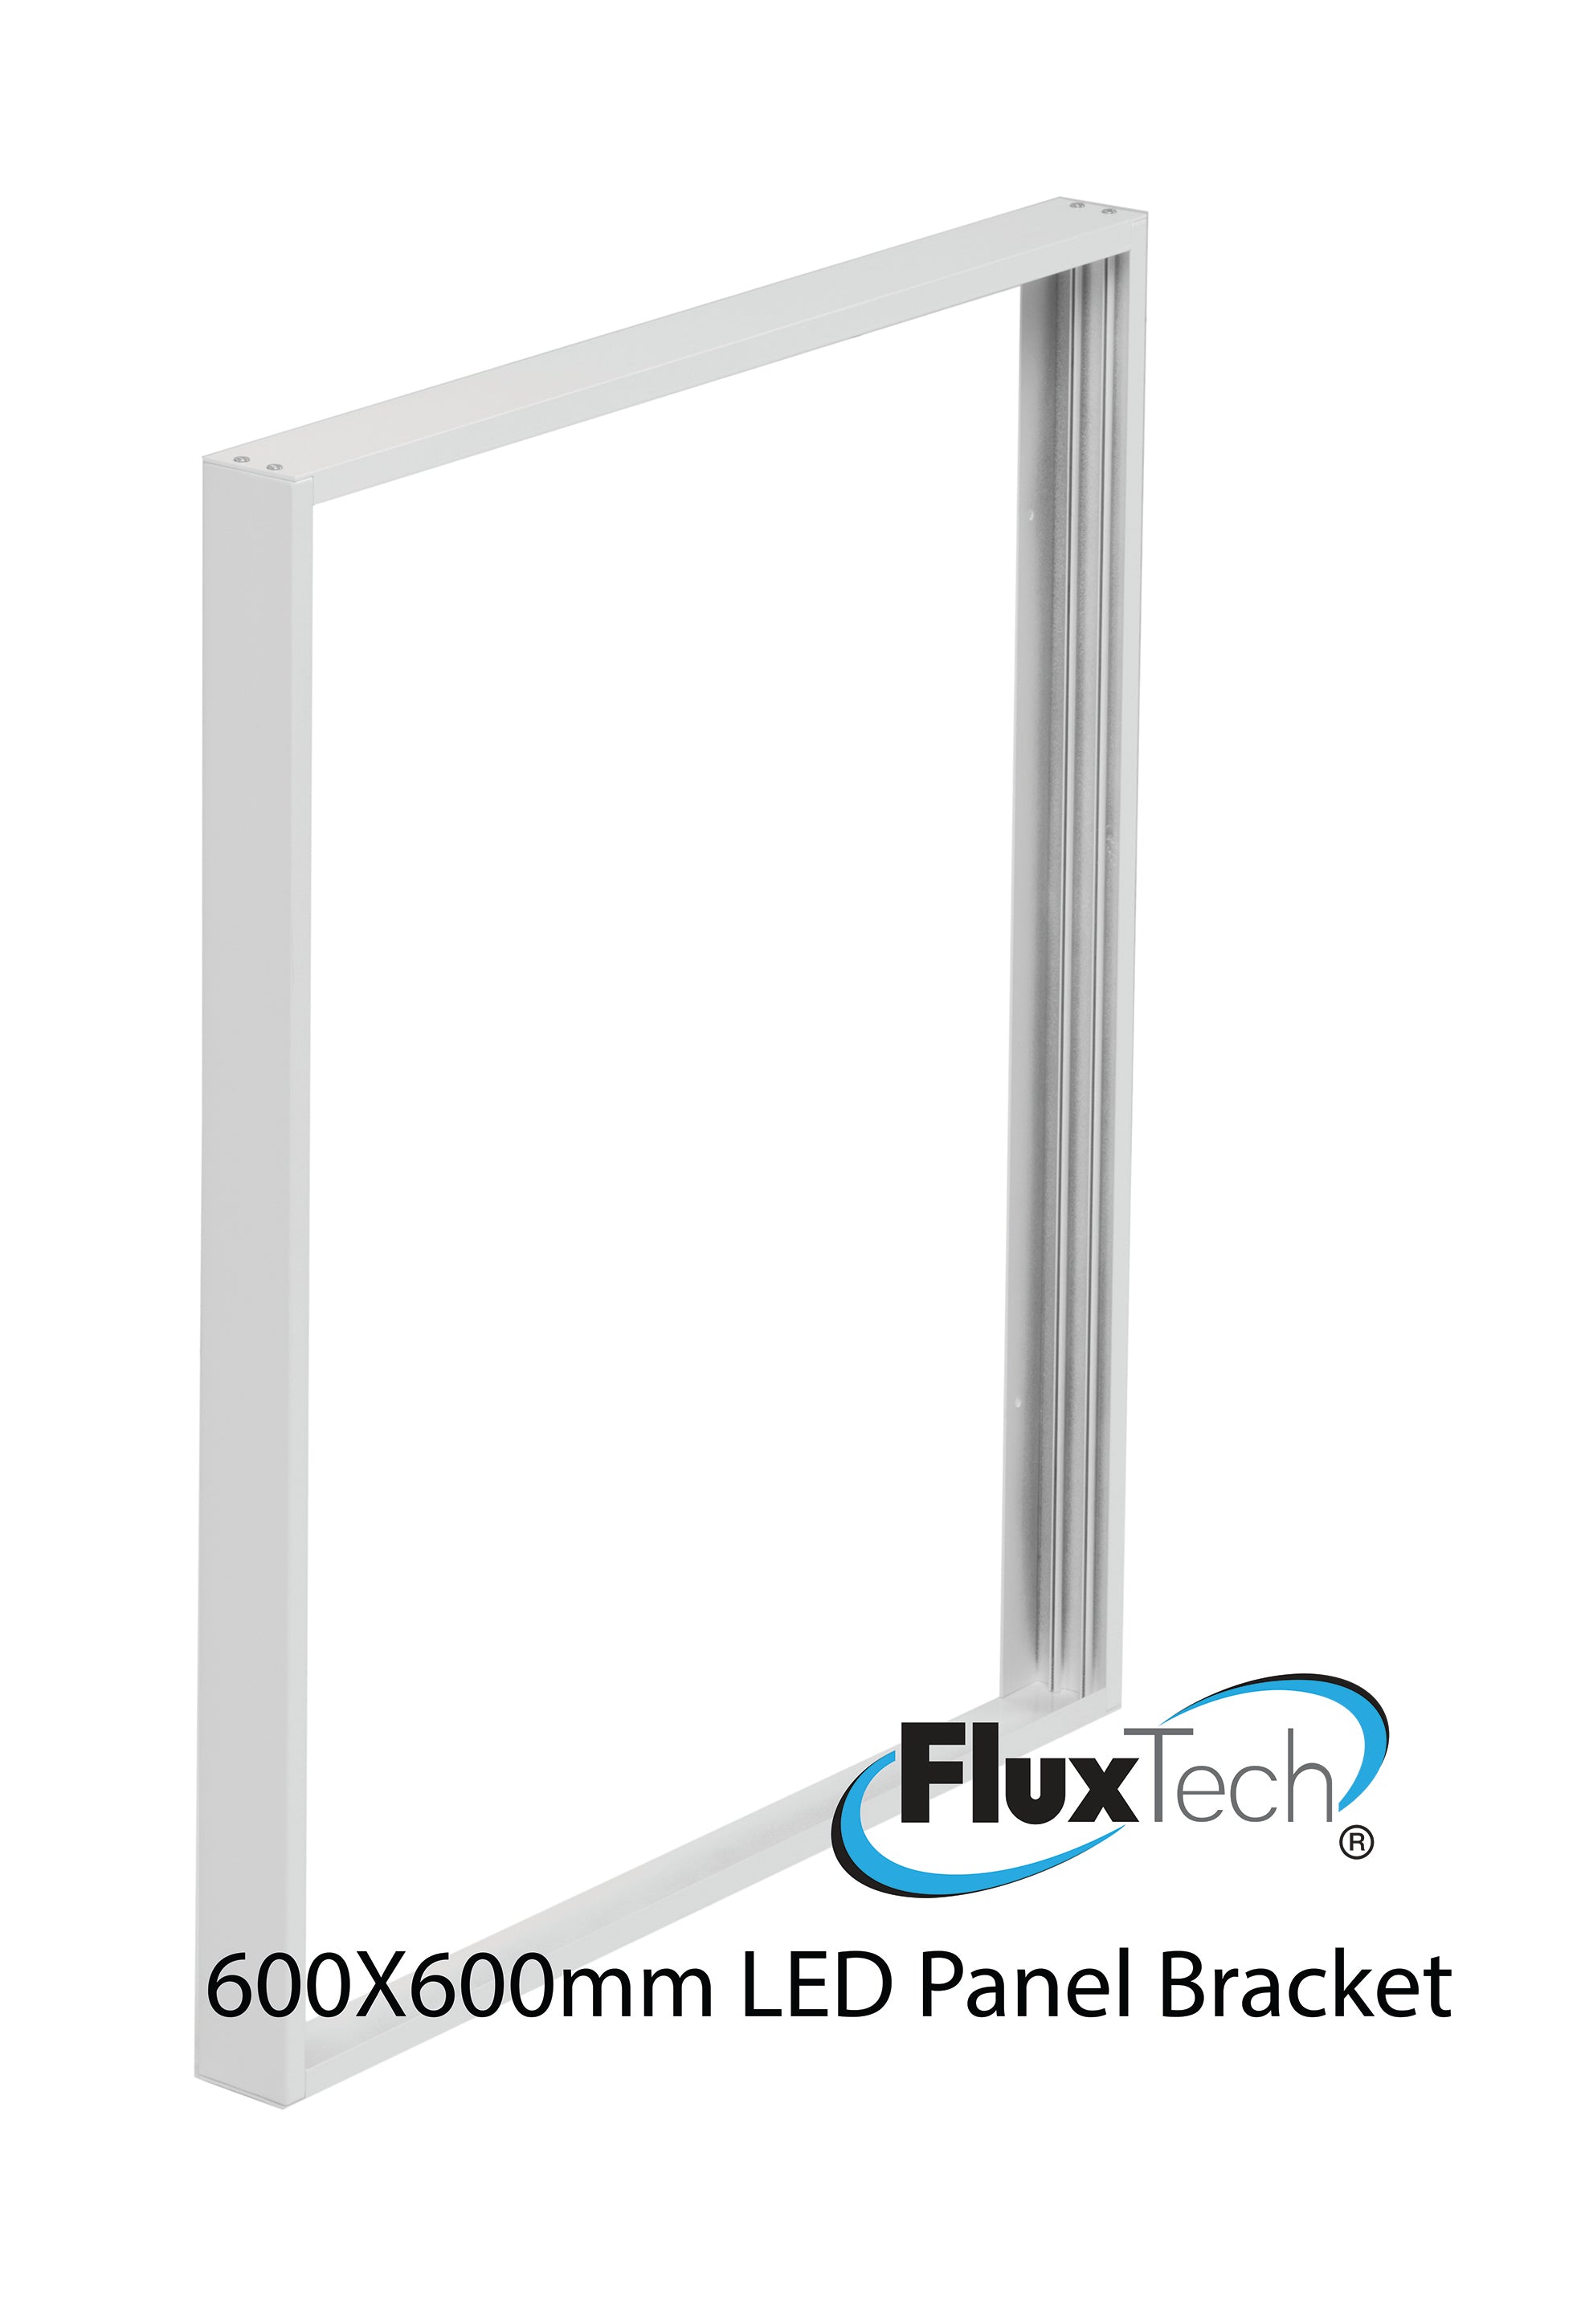 FluxTech - Surface Mounted Bracket for 600x600mm LED Panel Light